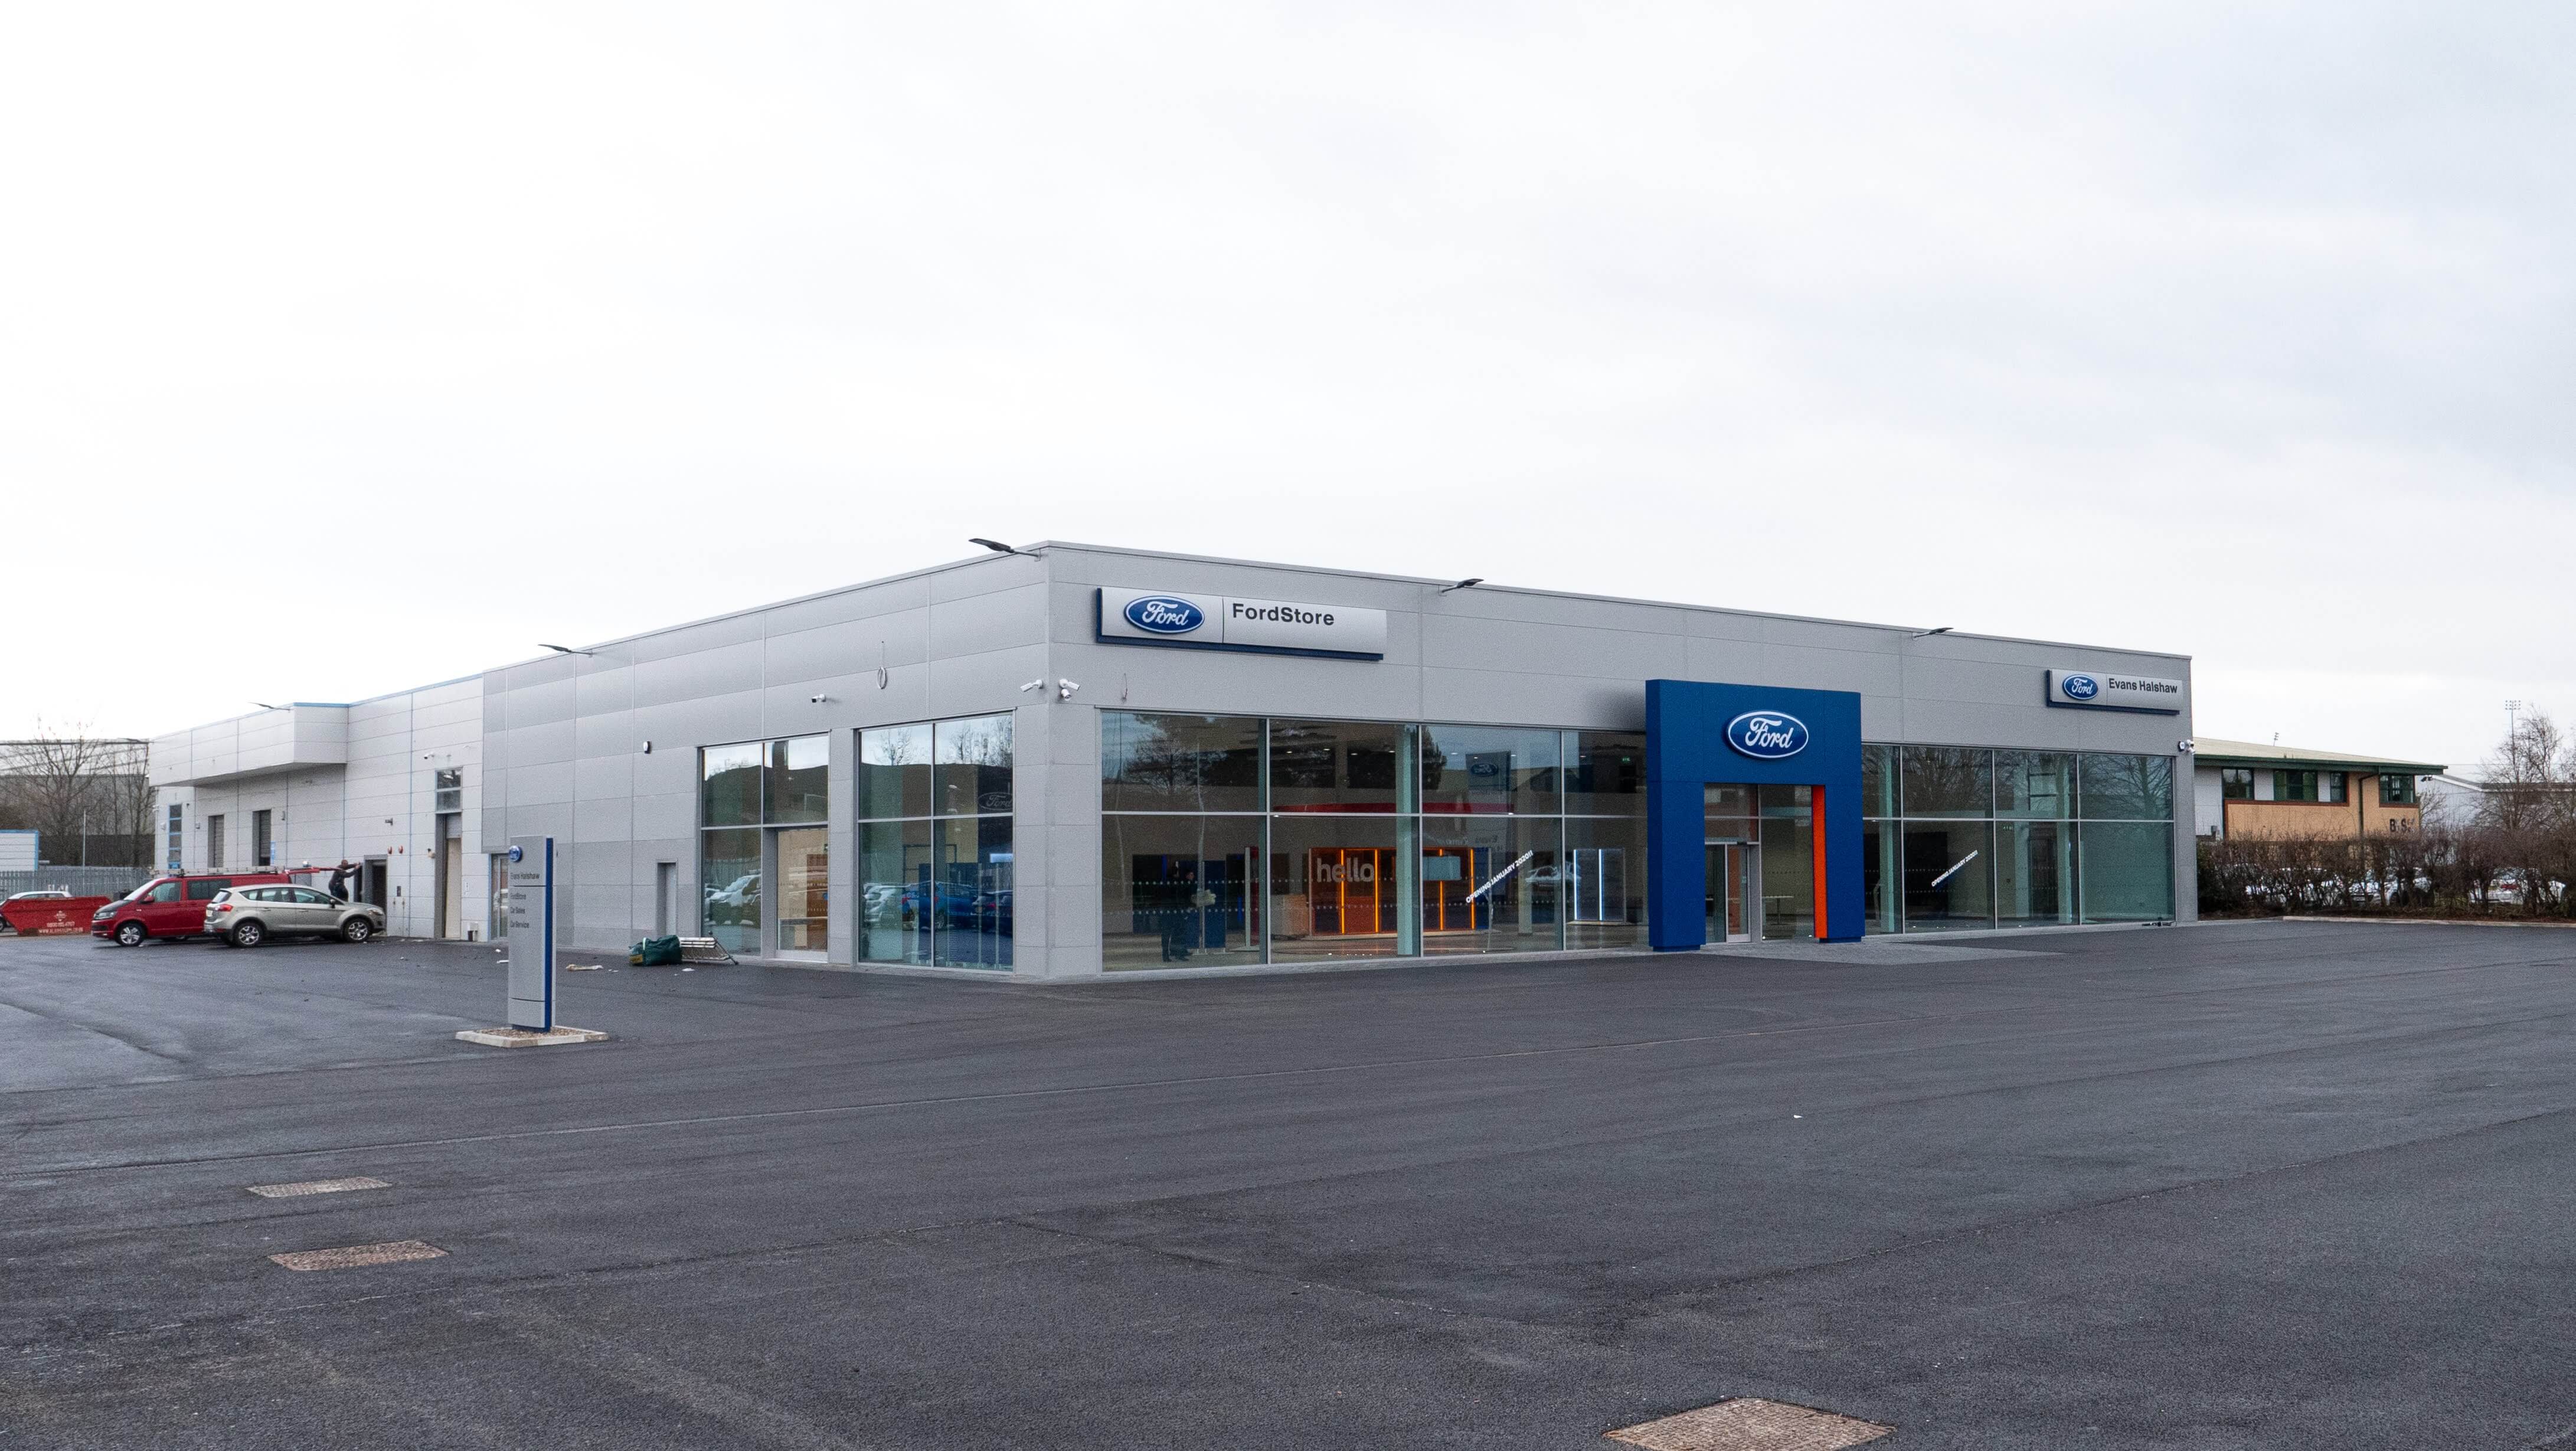 Images Evans Halshaw Ford Chester